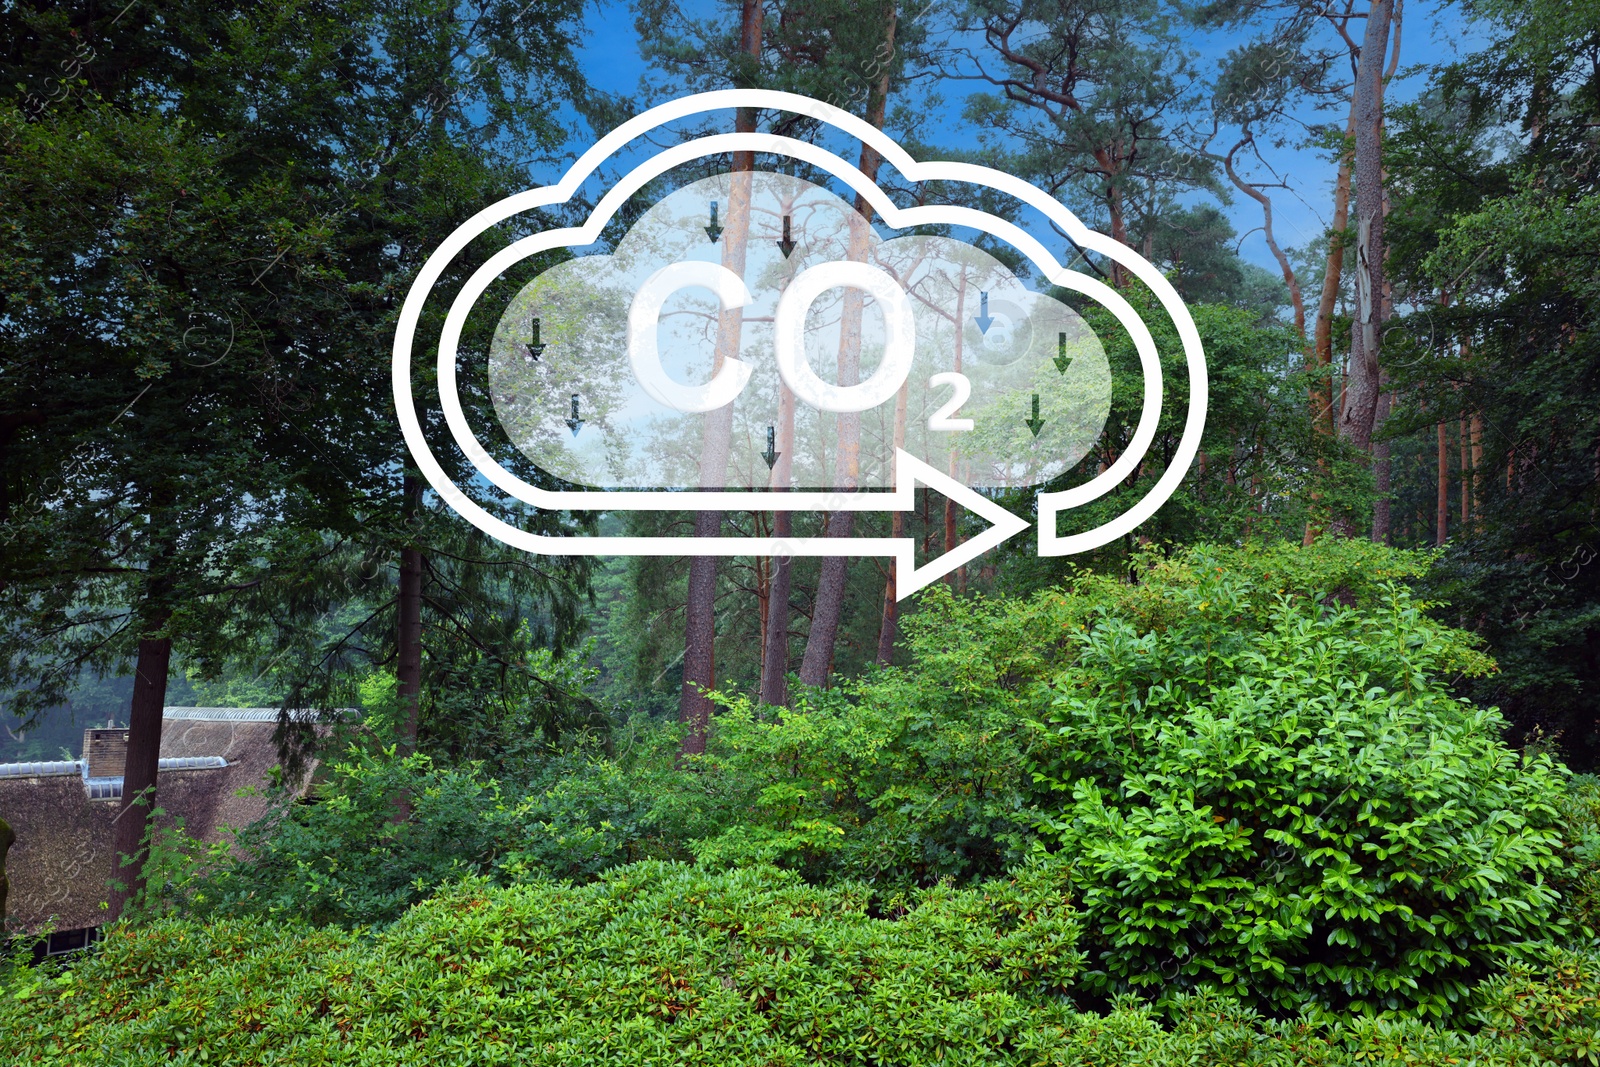 Image of Reduce CO2 emissions. Illustration of cloud with CO2 inscription, arrows and beautiful forest